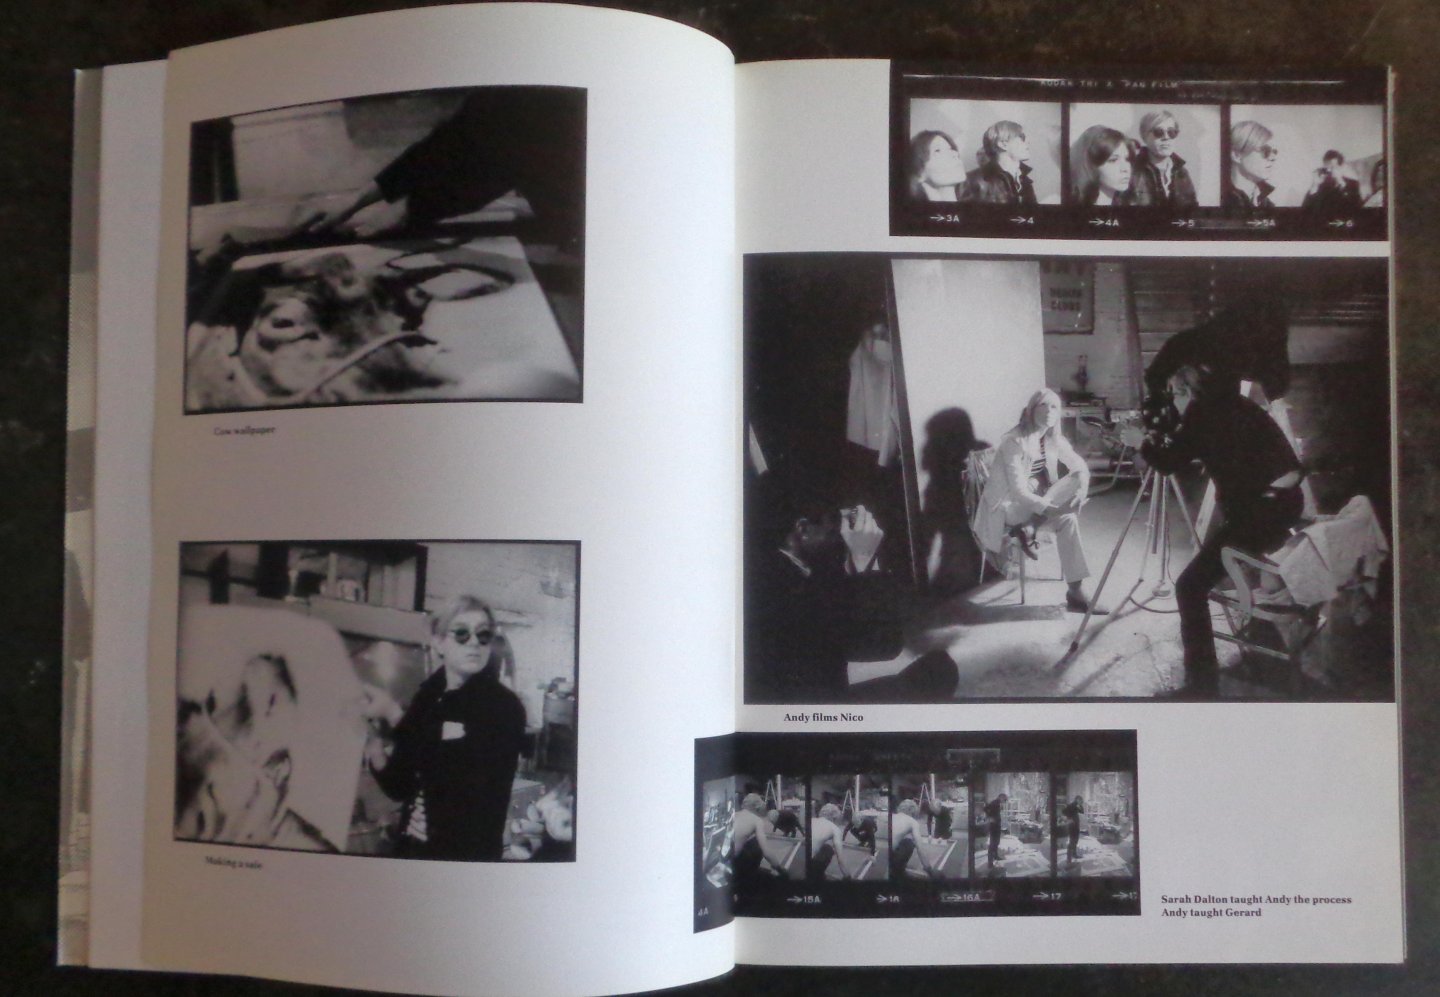 finkelstein, nat - Andy Warhol: 'Oh this is fabulous'. A report by Nat Finkelstein. The silver age at the Factory 1964-1967